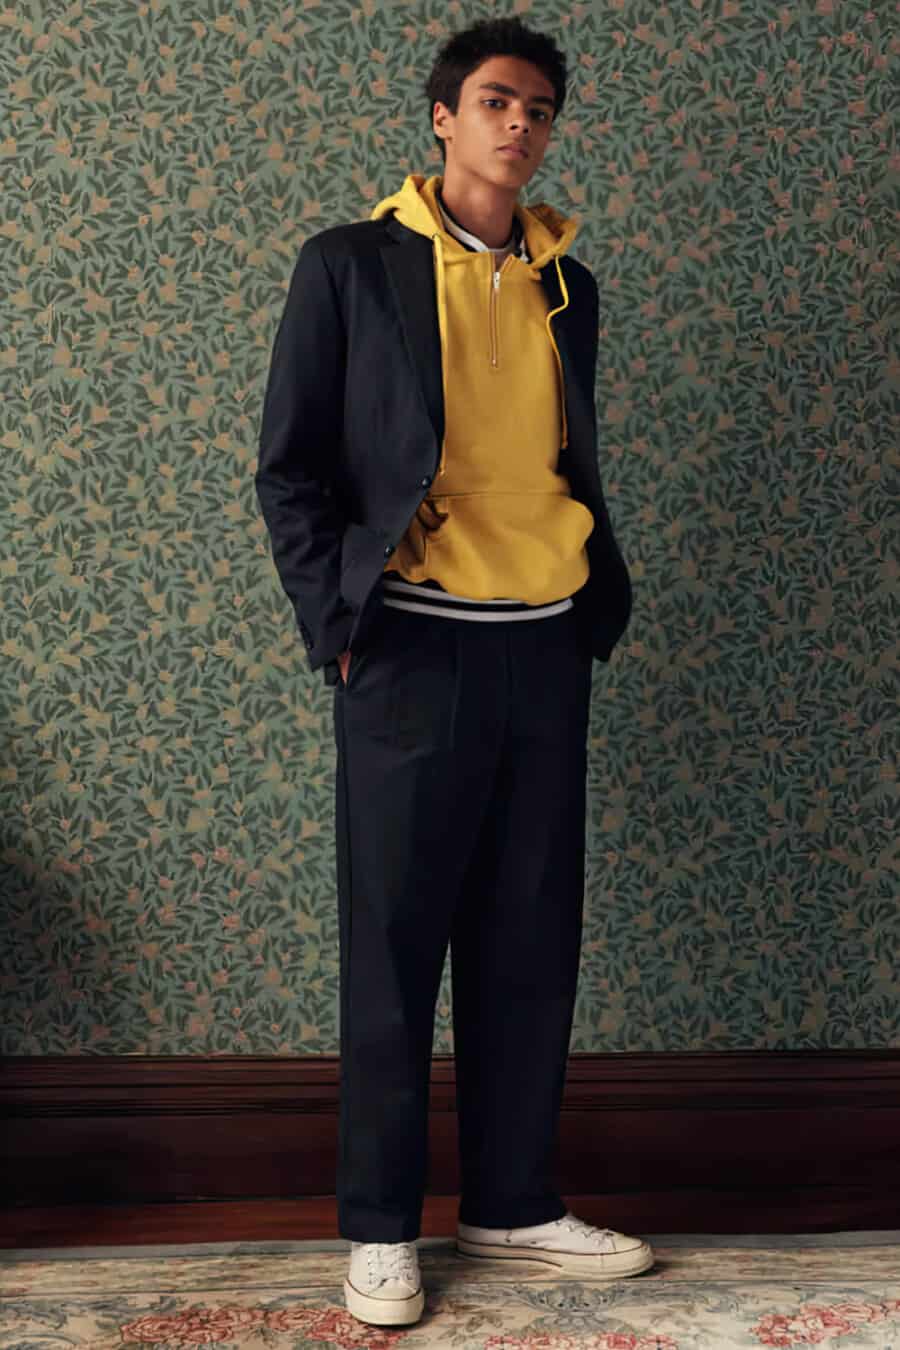 Men's navy suit, yellow hoodie and off-white canvas low top sneakers outfit